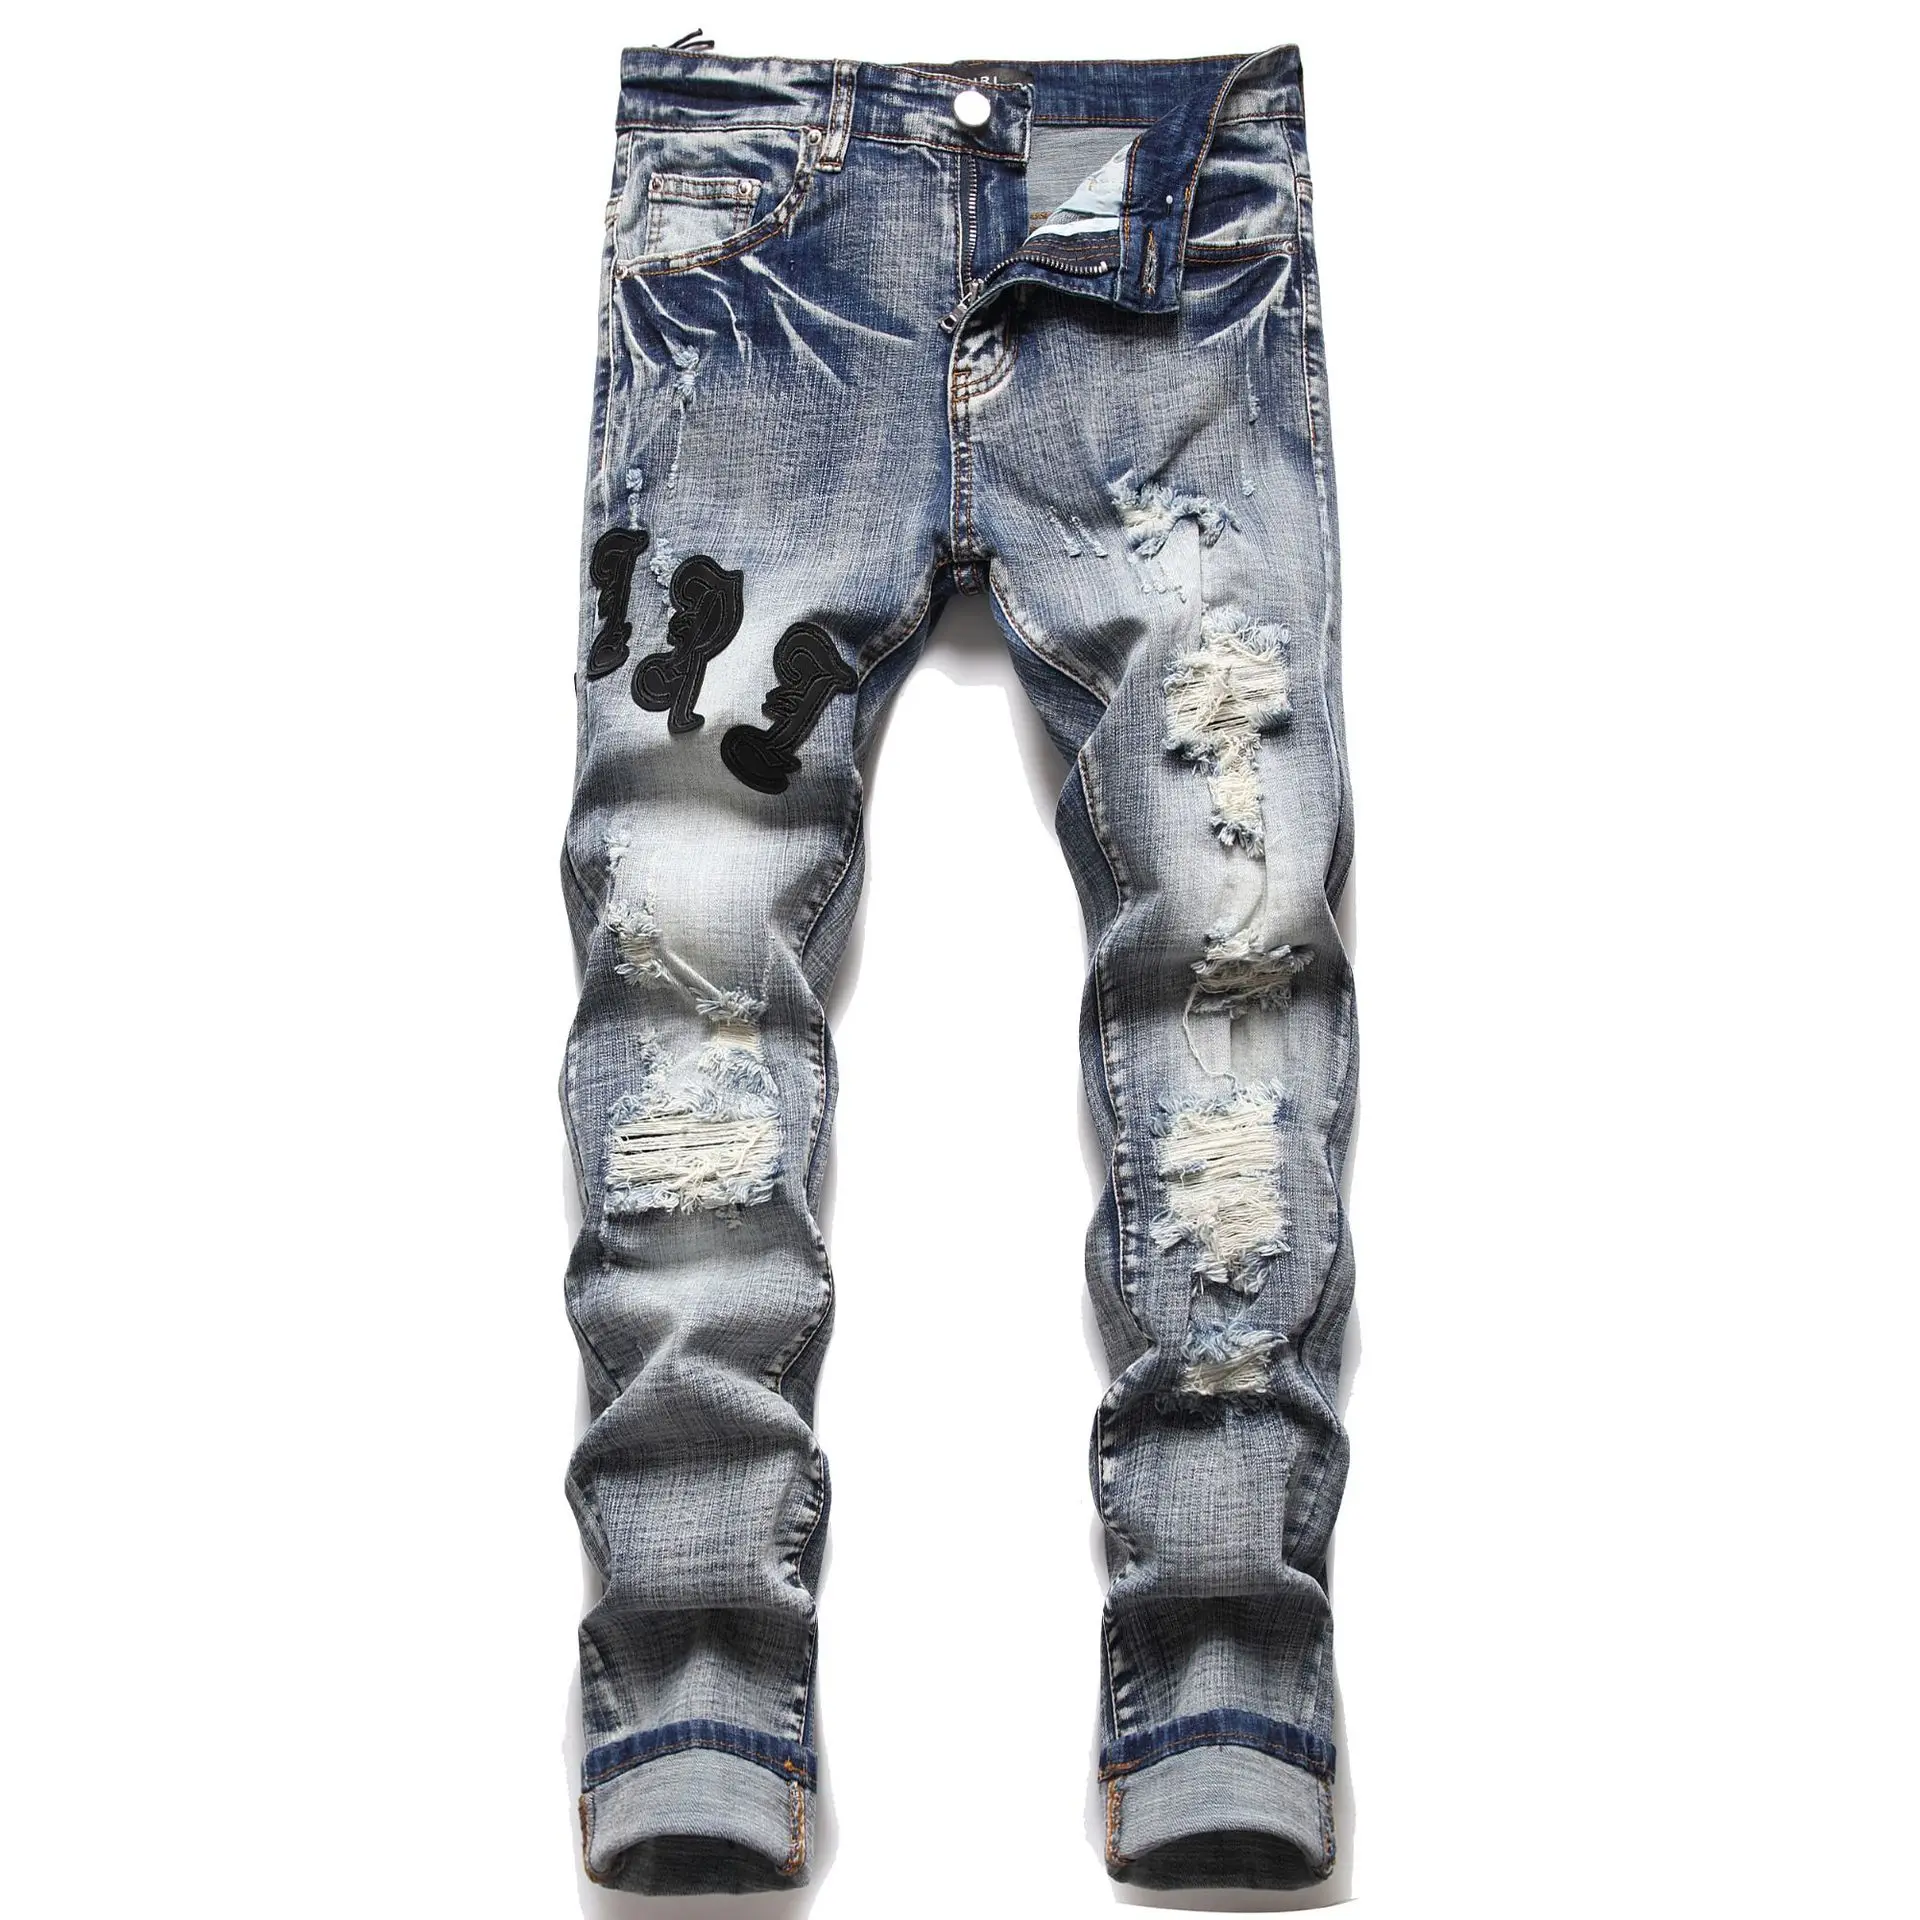 Oem Custom High Street Embroidery Ripped Denim Jeans Vintage Stacked ...